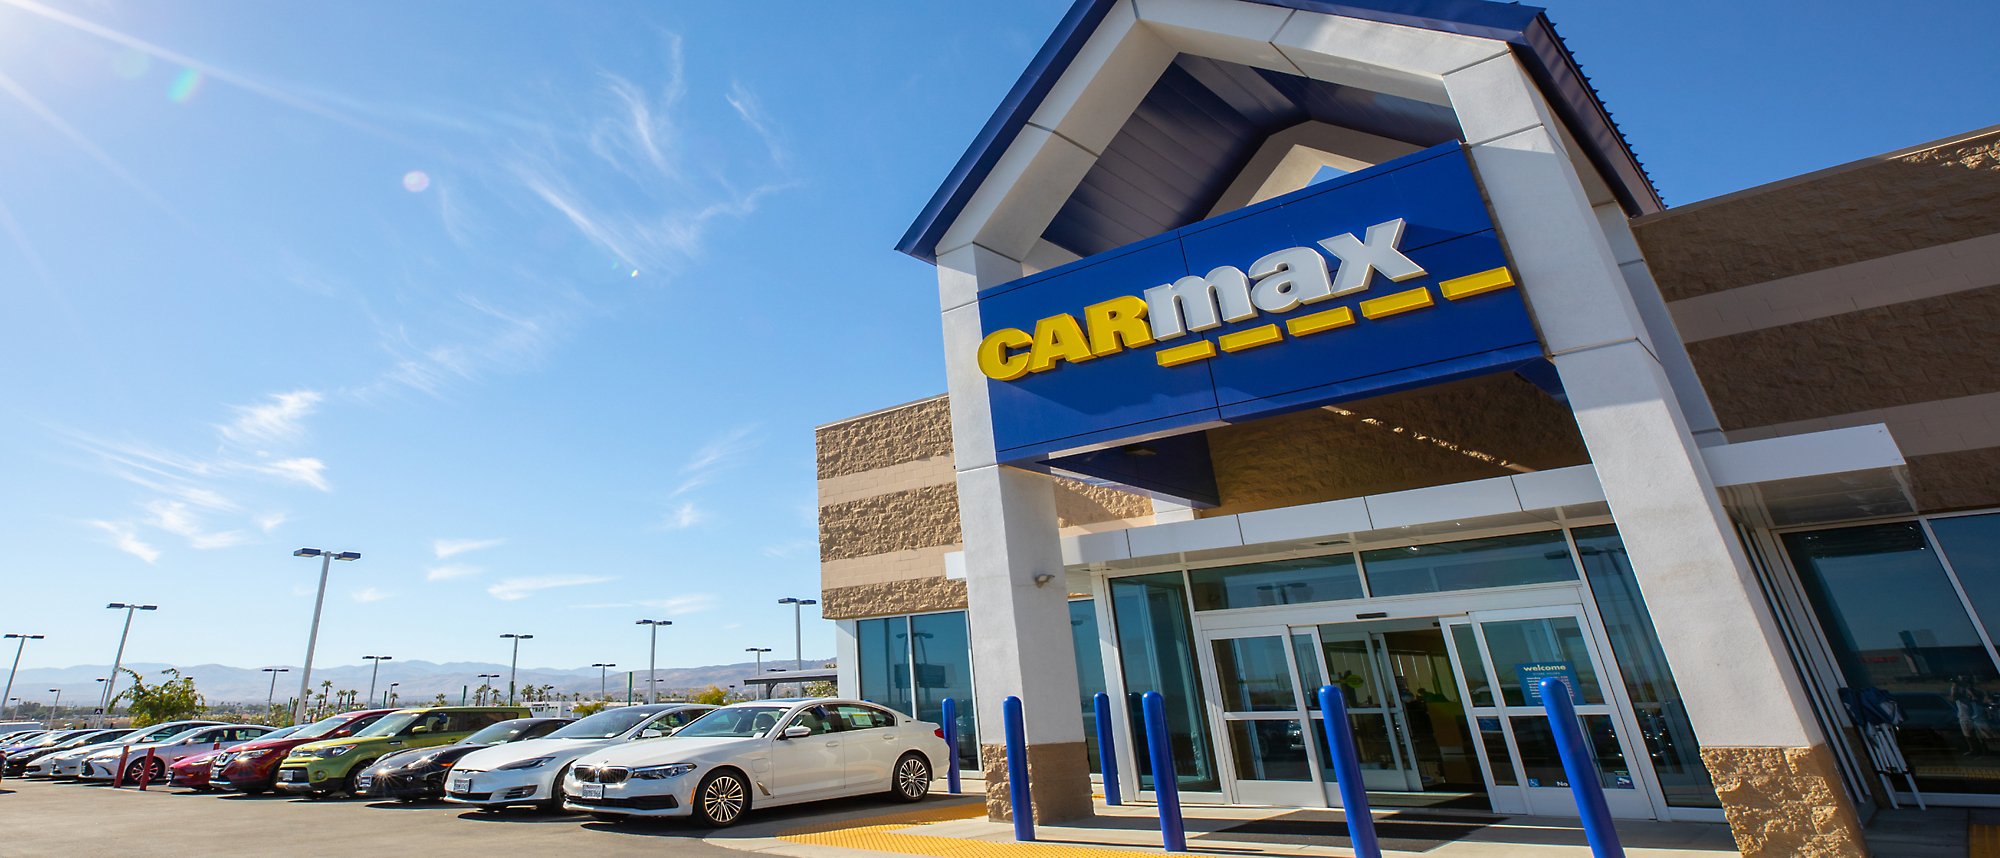 A picture of carmax building with many cars parked outside